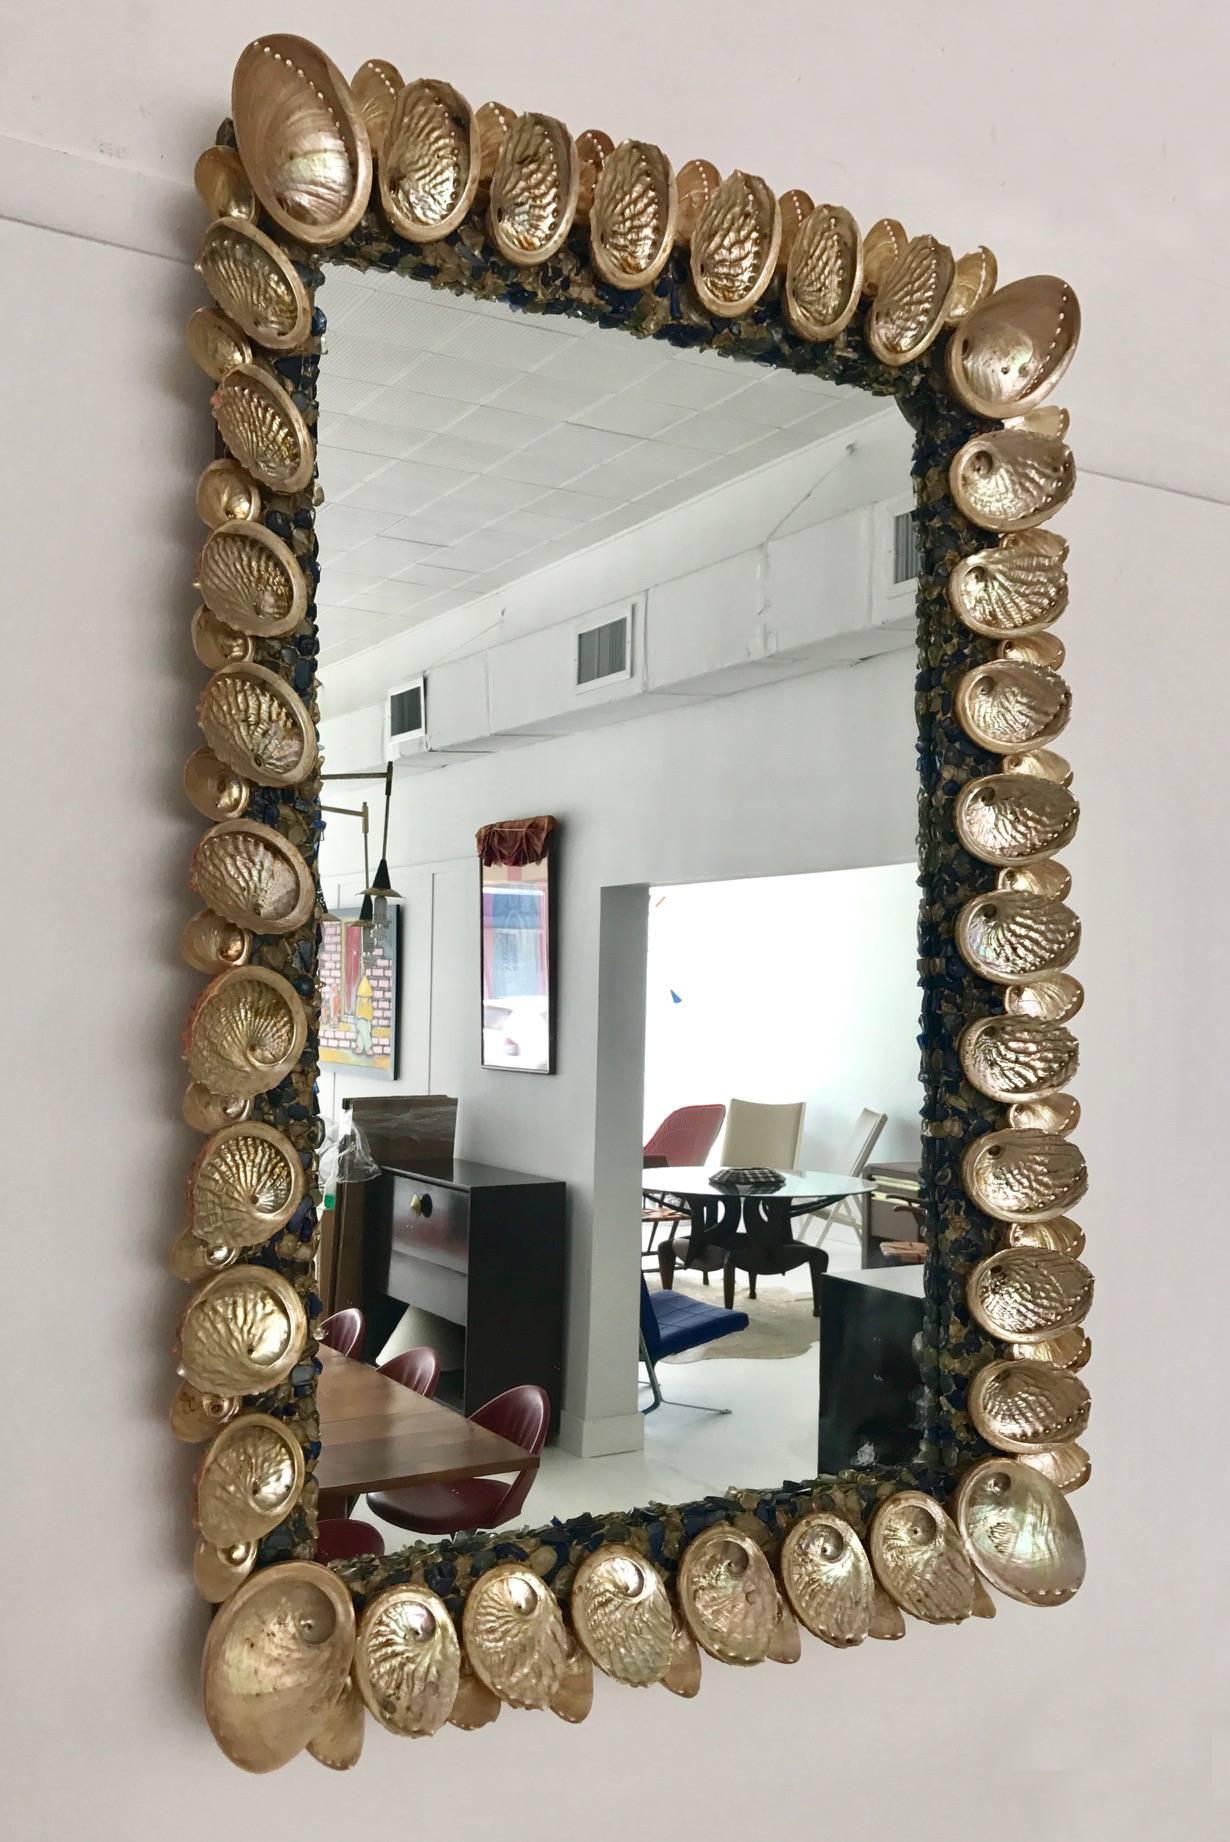 A beautiful handcrafted wall mirror in the style of Tony Duquette circa 1950-60s. It features an inner frame with mother-of-pearl finishes inset with blue color and clear glass pebbles, and an outer frame with abalone shells of alternating sizes.